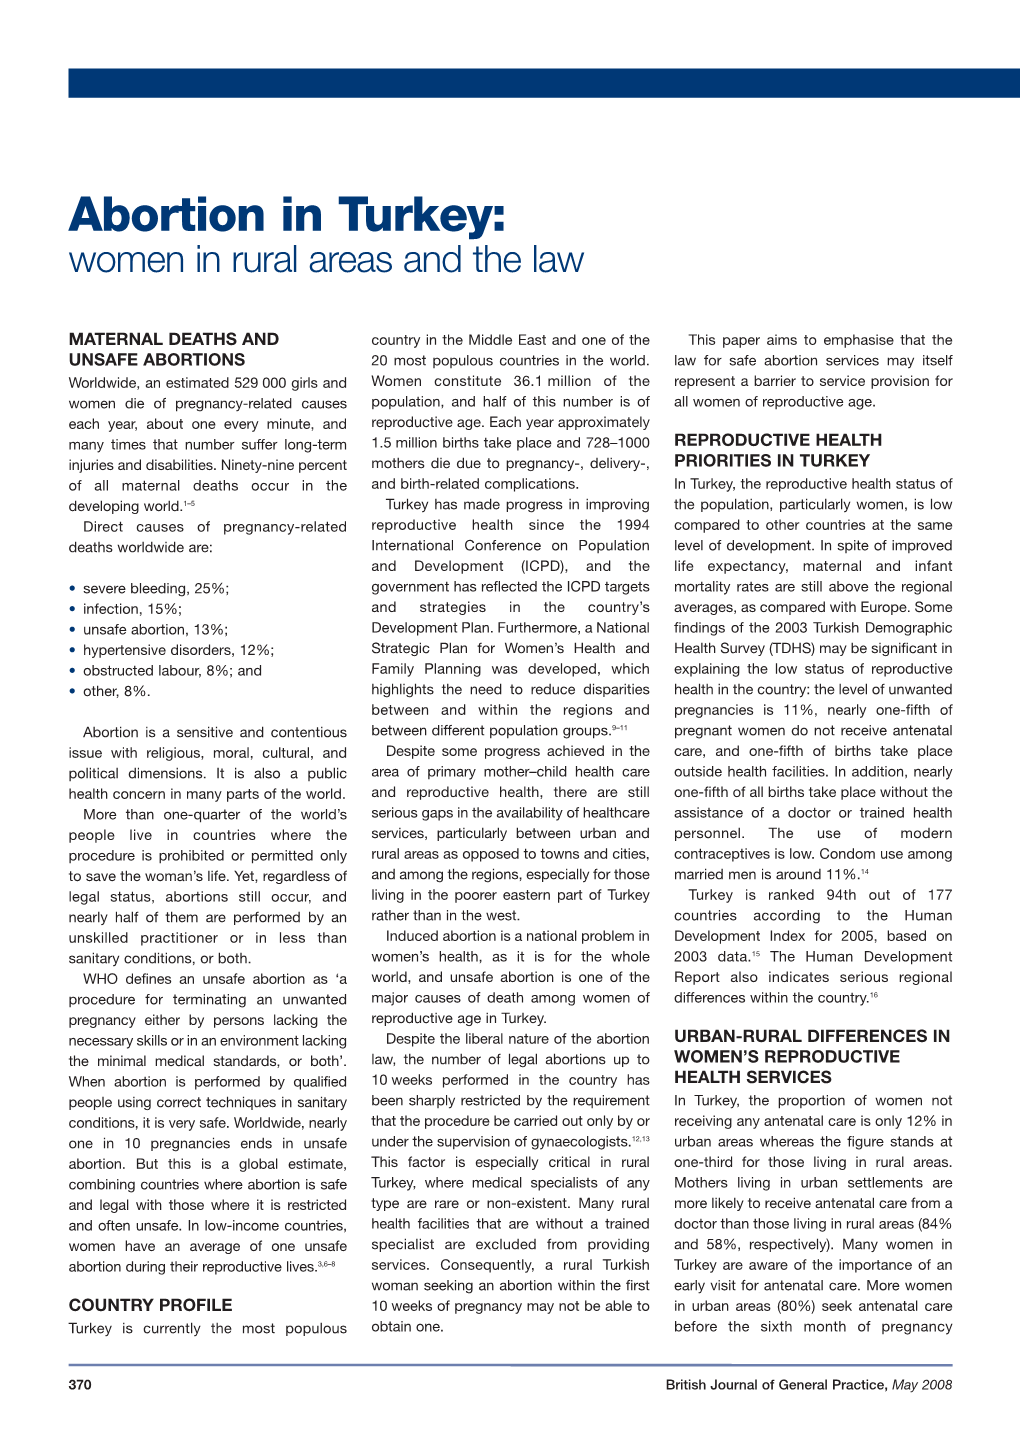 Abortion in Turkey: Women in Rural Areas and the Law